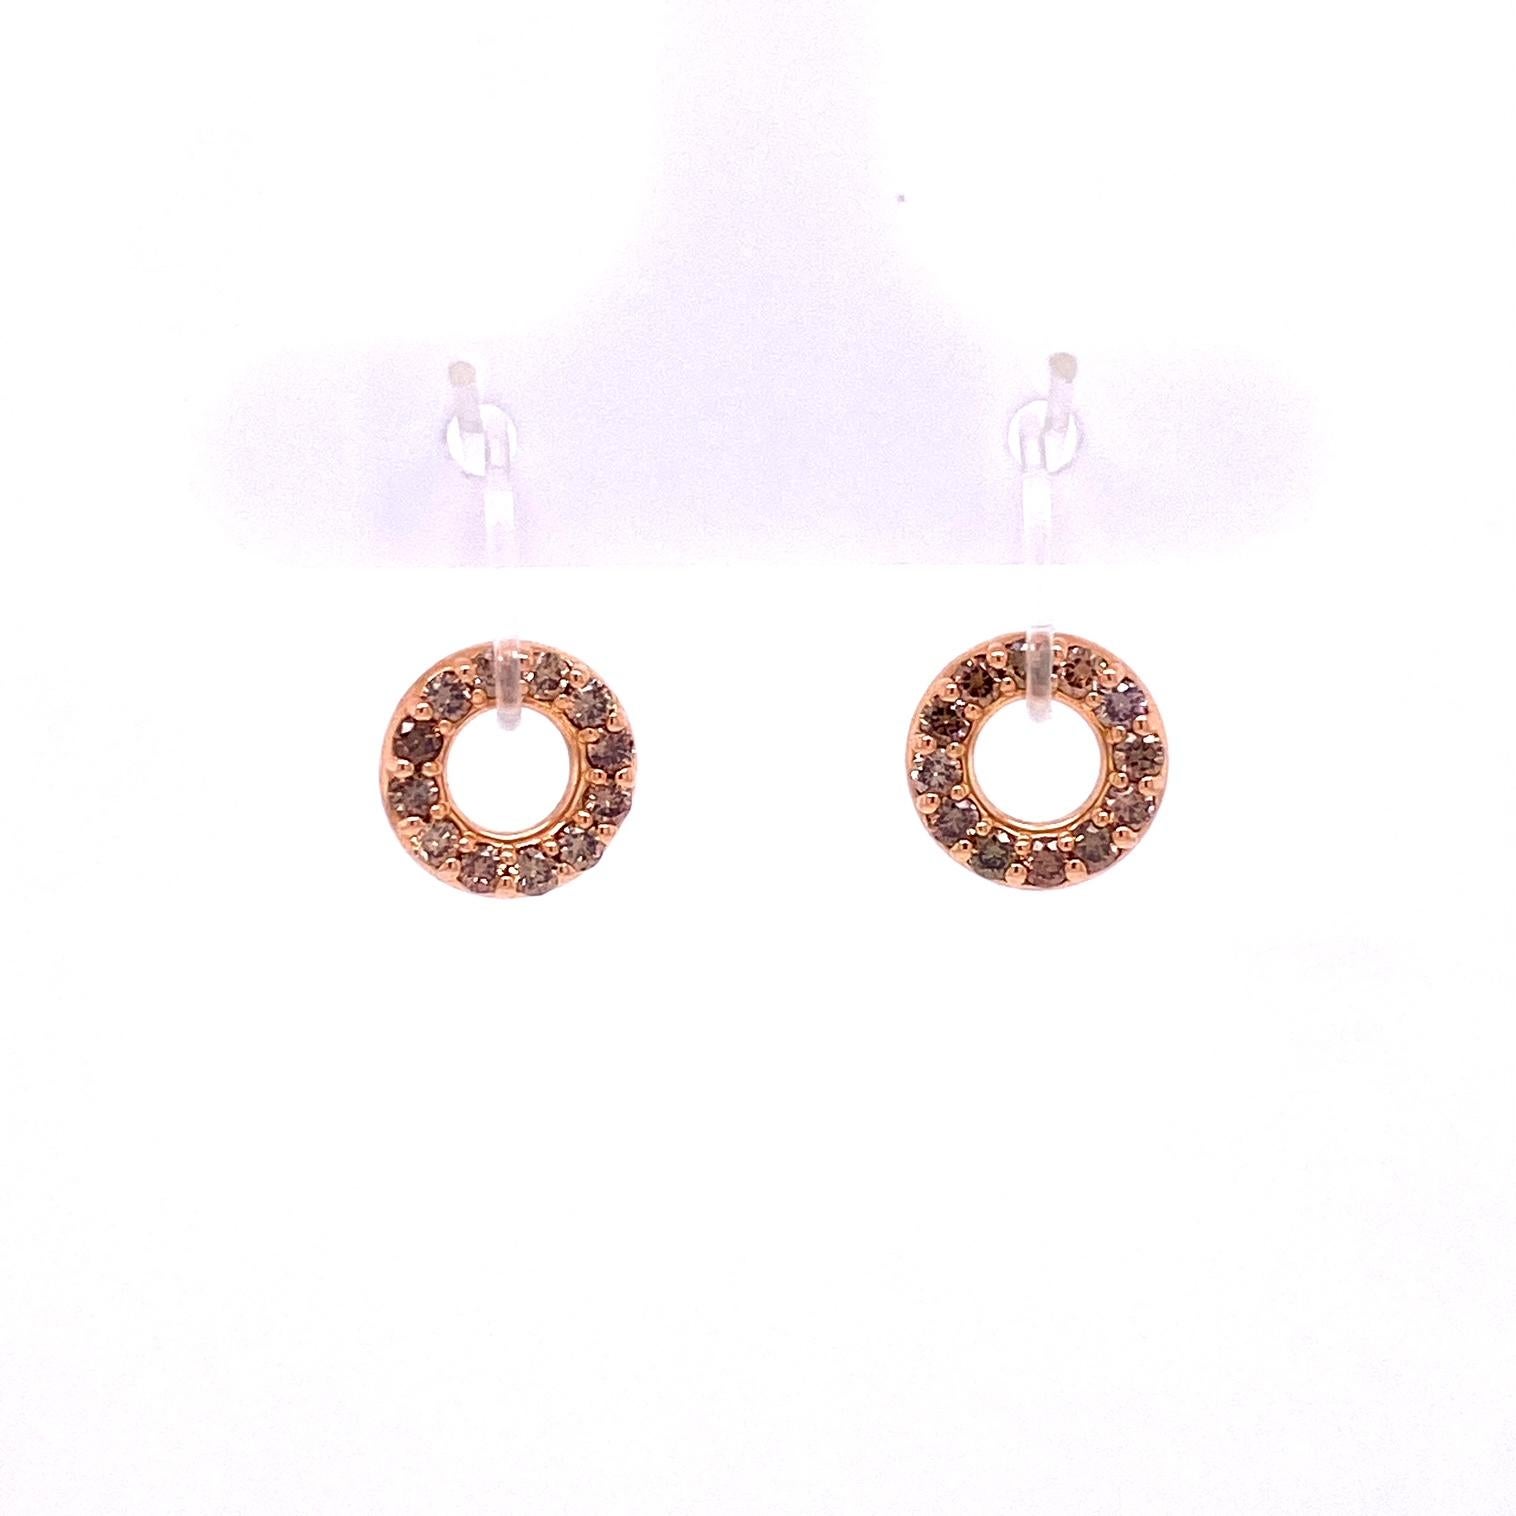 Women's or Men's 18 Karat Gold Diamond Hoops with Champagne Diamond Circles and Carnelian Jackets